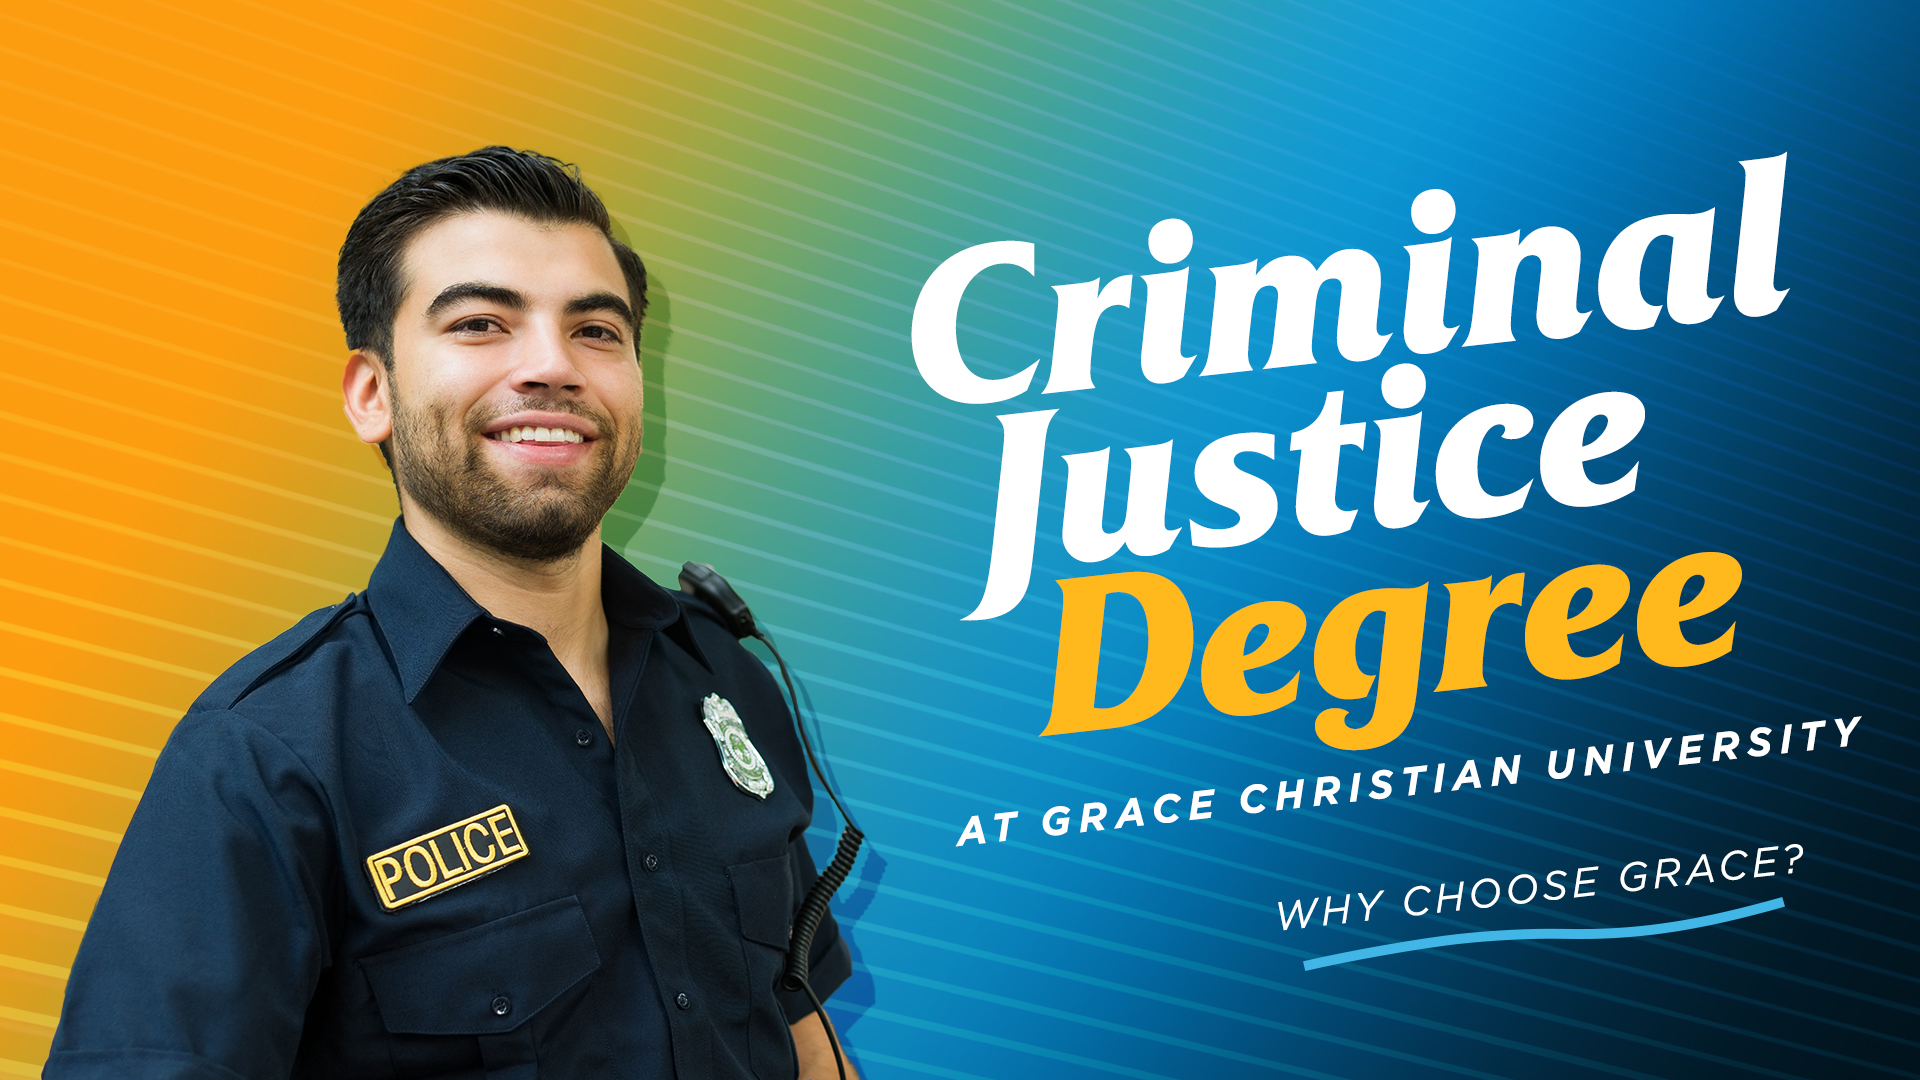 Criminal Justice Degree at Grace Christian University – Why Choose Grace?